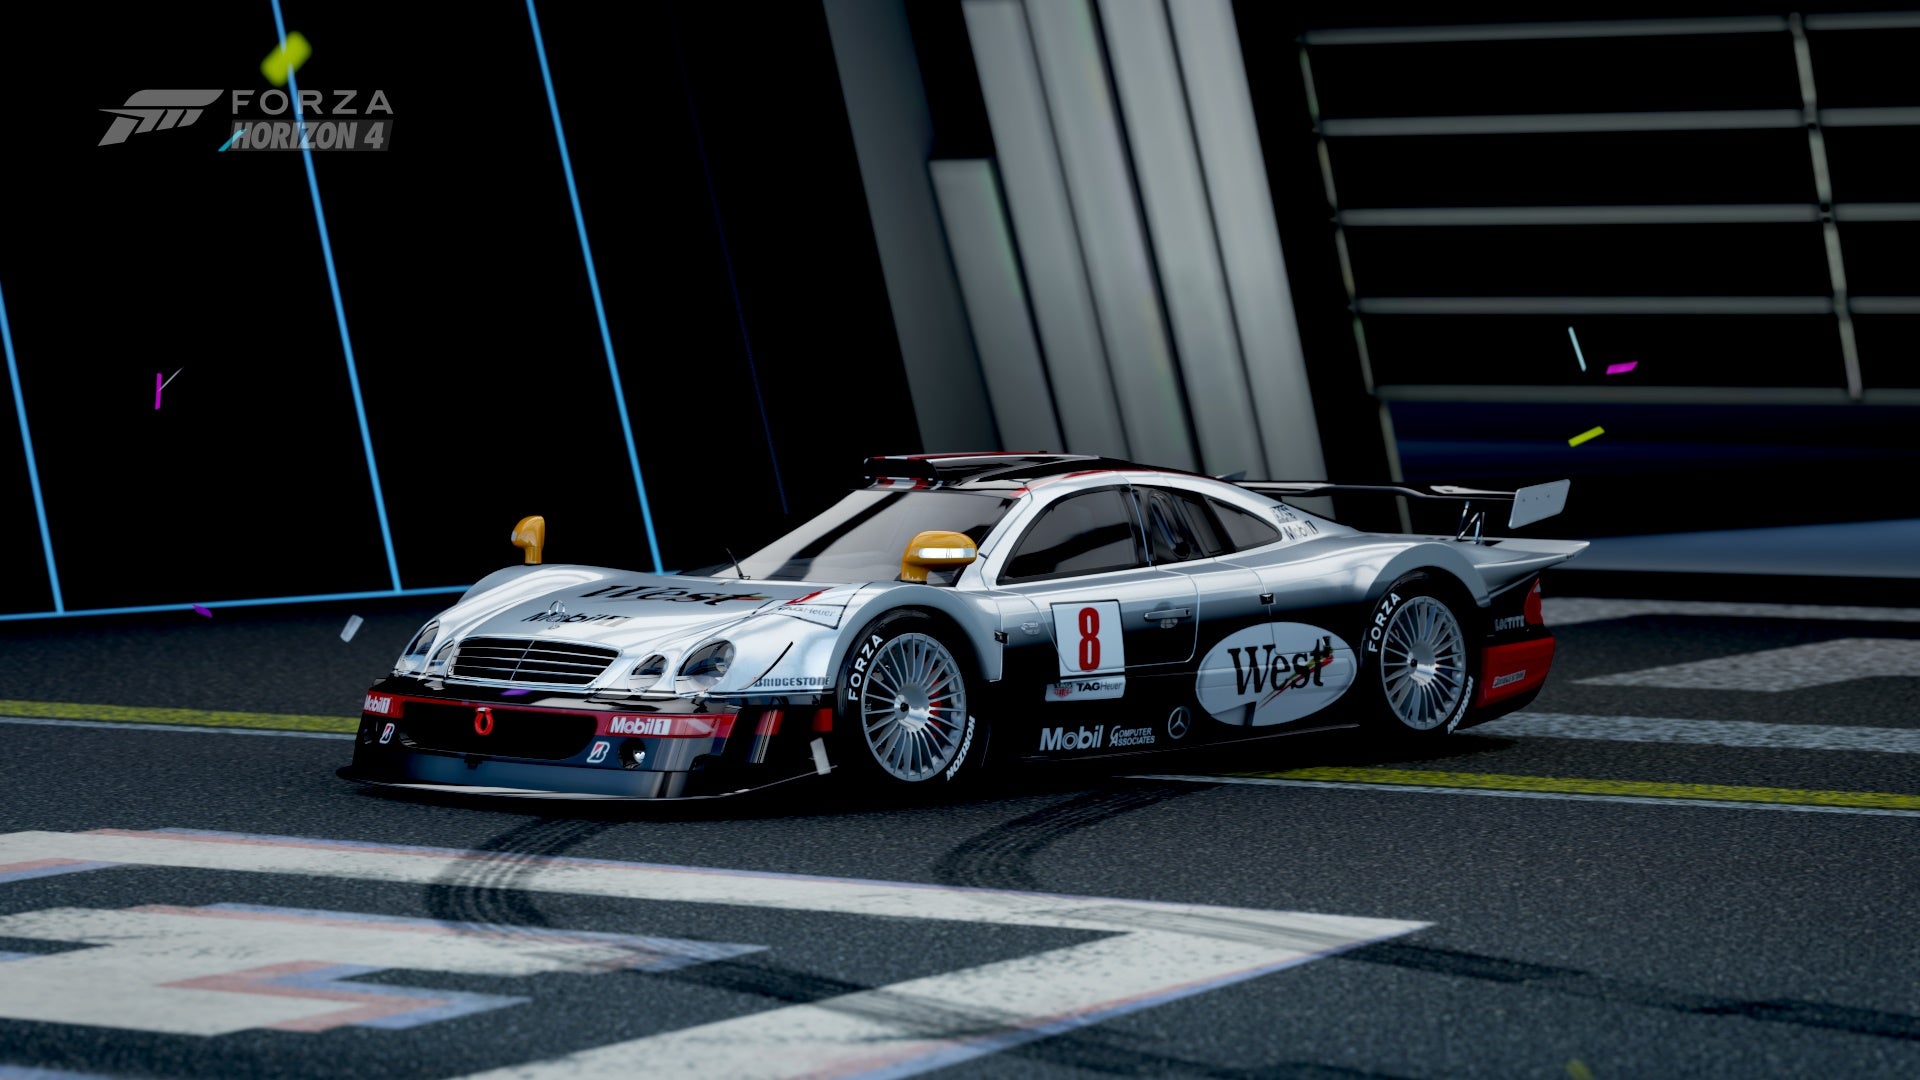 Fun twist on the Mercedes AMG CLK GTR, using a variation of the Mclaren Formula 1 1998 livery : r/forza